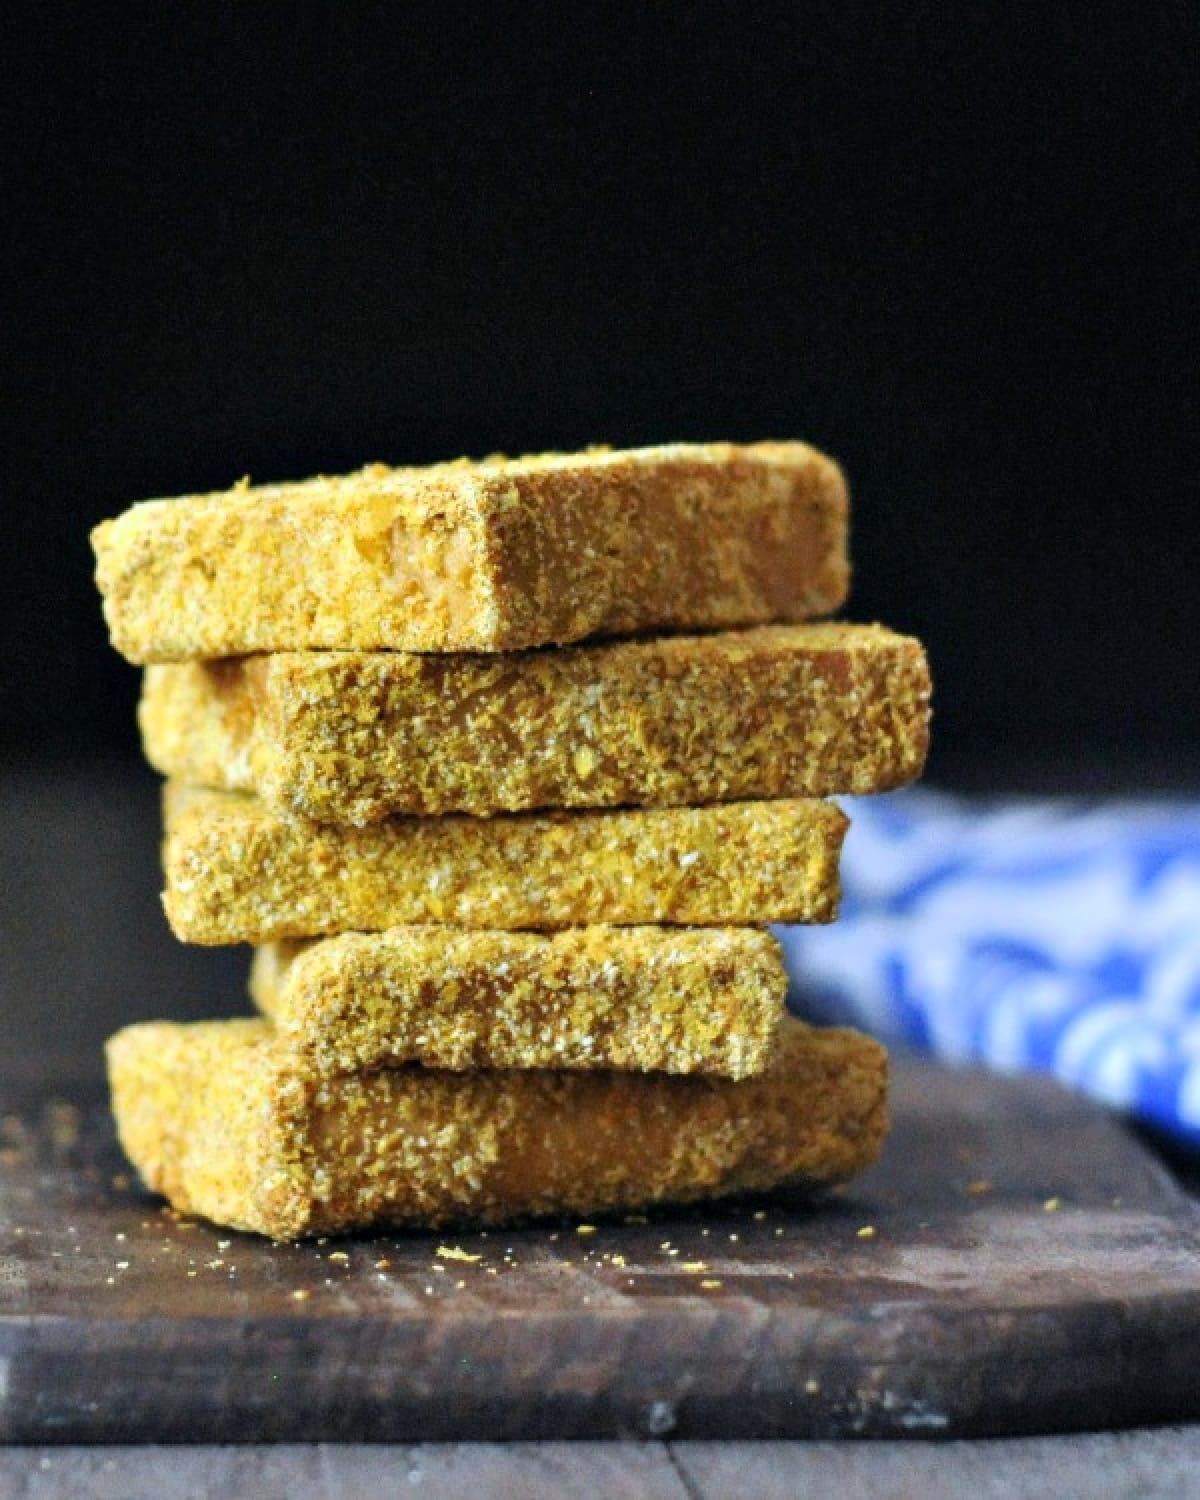 A stack of crispy fried tofu on a dark wood cutting board against a black background, blue and white napkin blurred in the right side background.